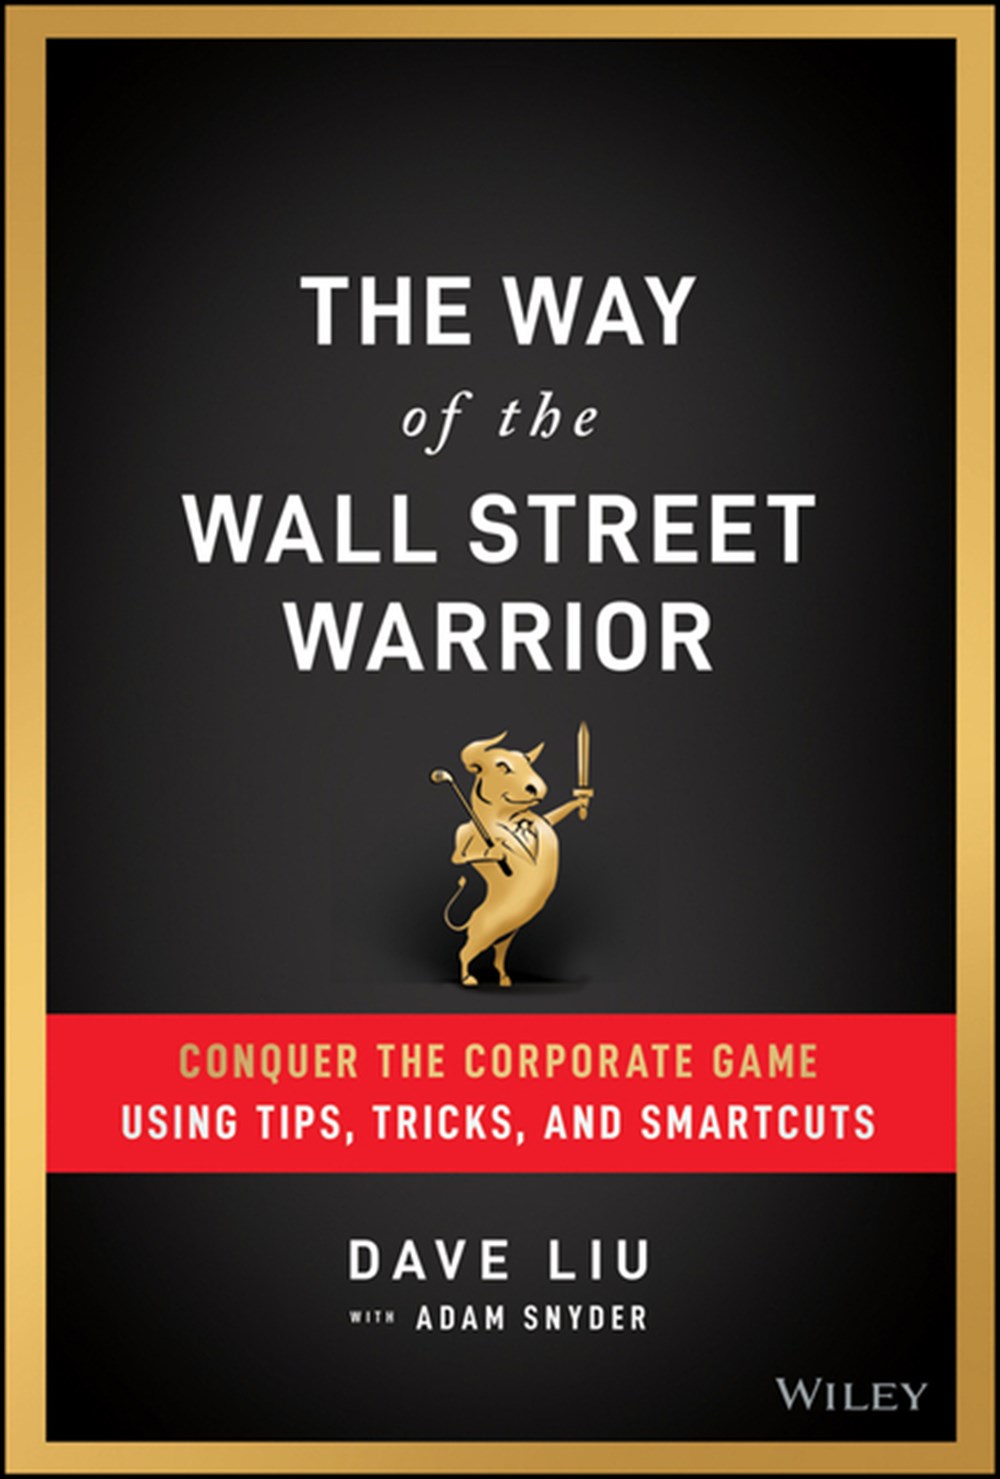 Way of the Wall Street Warrior: Conquer the Corporate Game Using Tips, Tricks, and Smartcuts